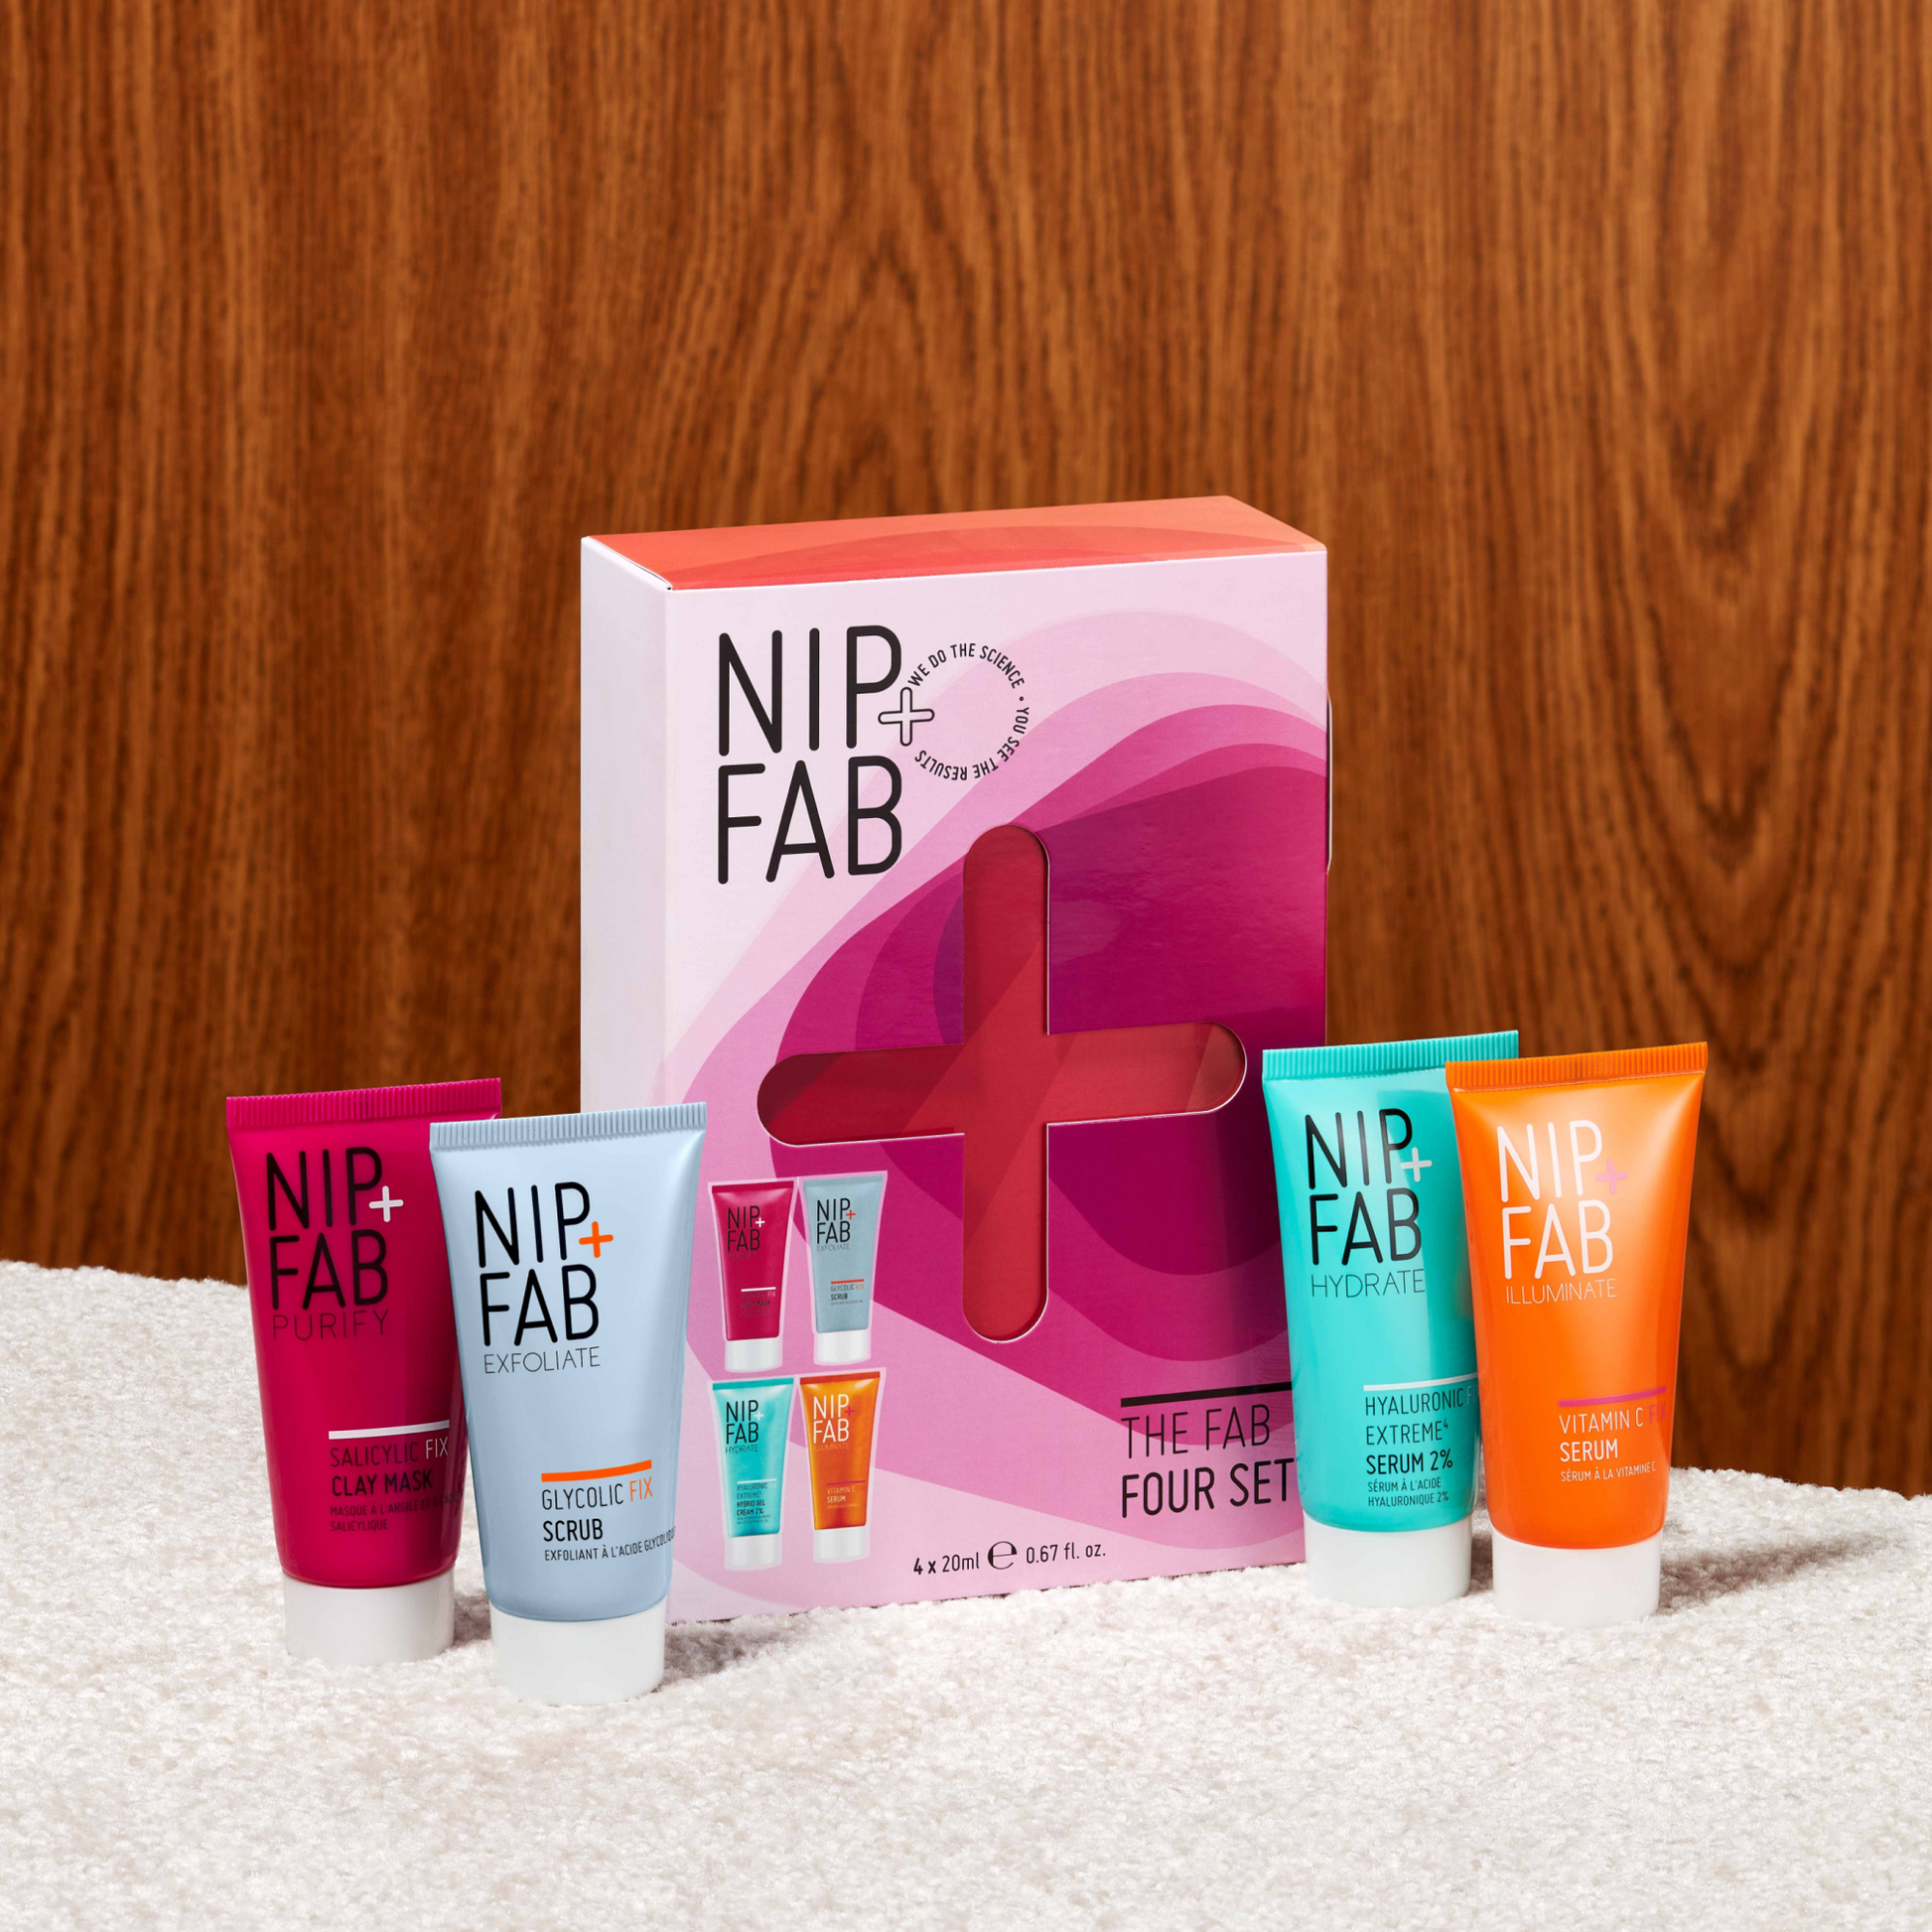 The Fab Four Gift Set